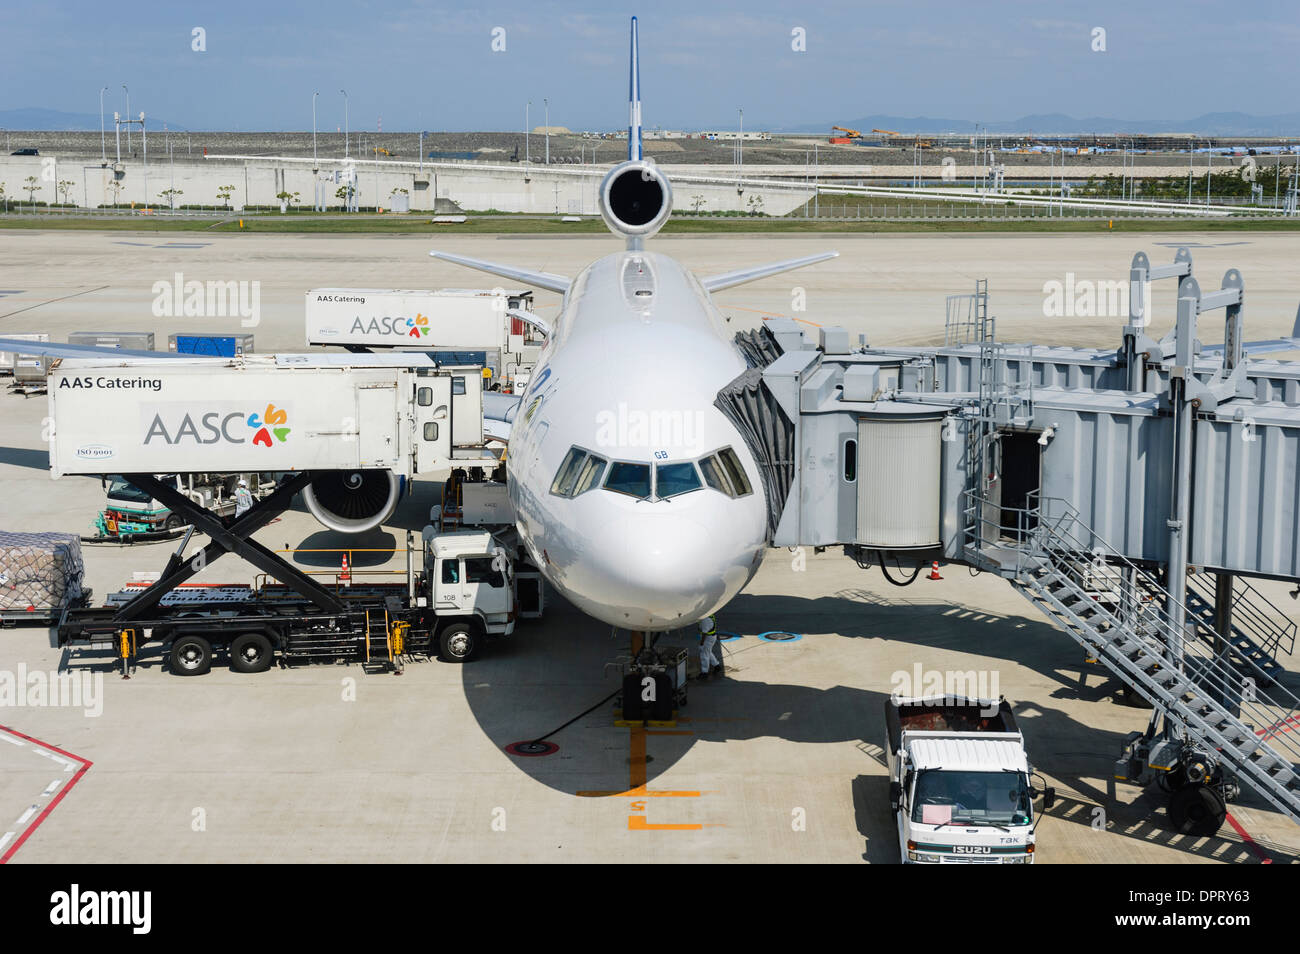 Plane being loaded; preparing for departure with airbridge attached